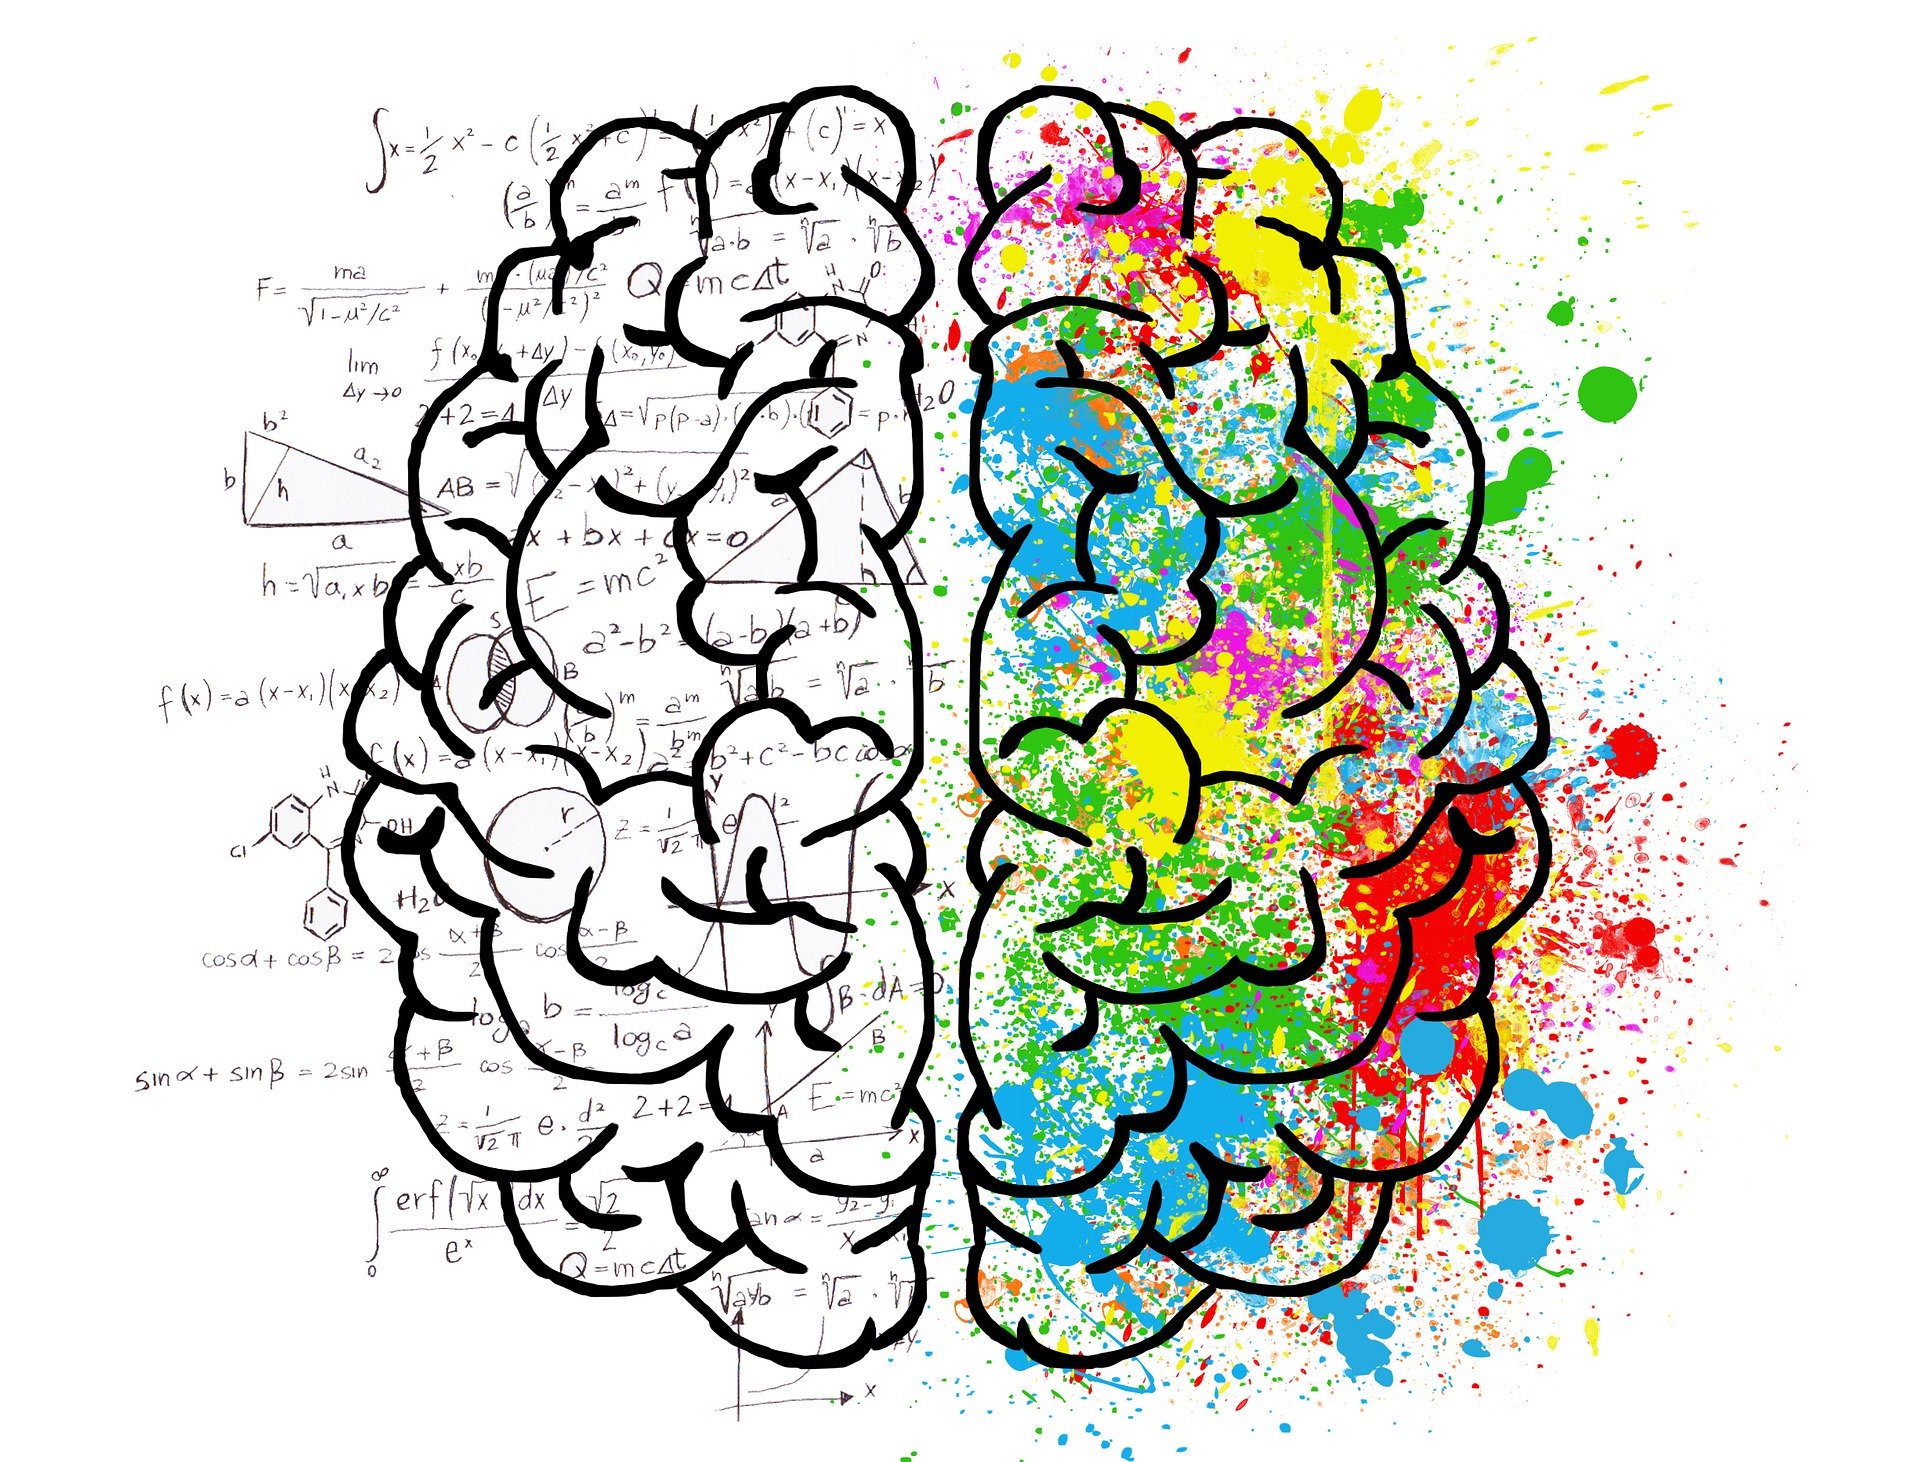 An image of a human brain with one half in black and white with a bunch of science and math symbols (representing the logic brain) and the other half painted in rainbow colours.